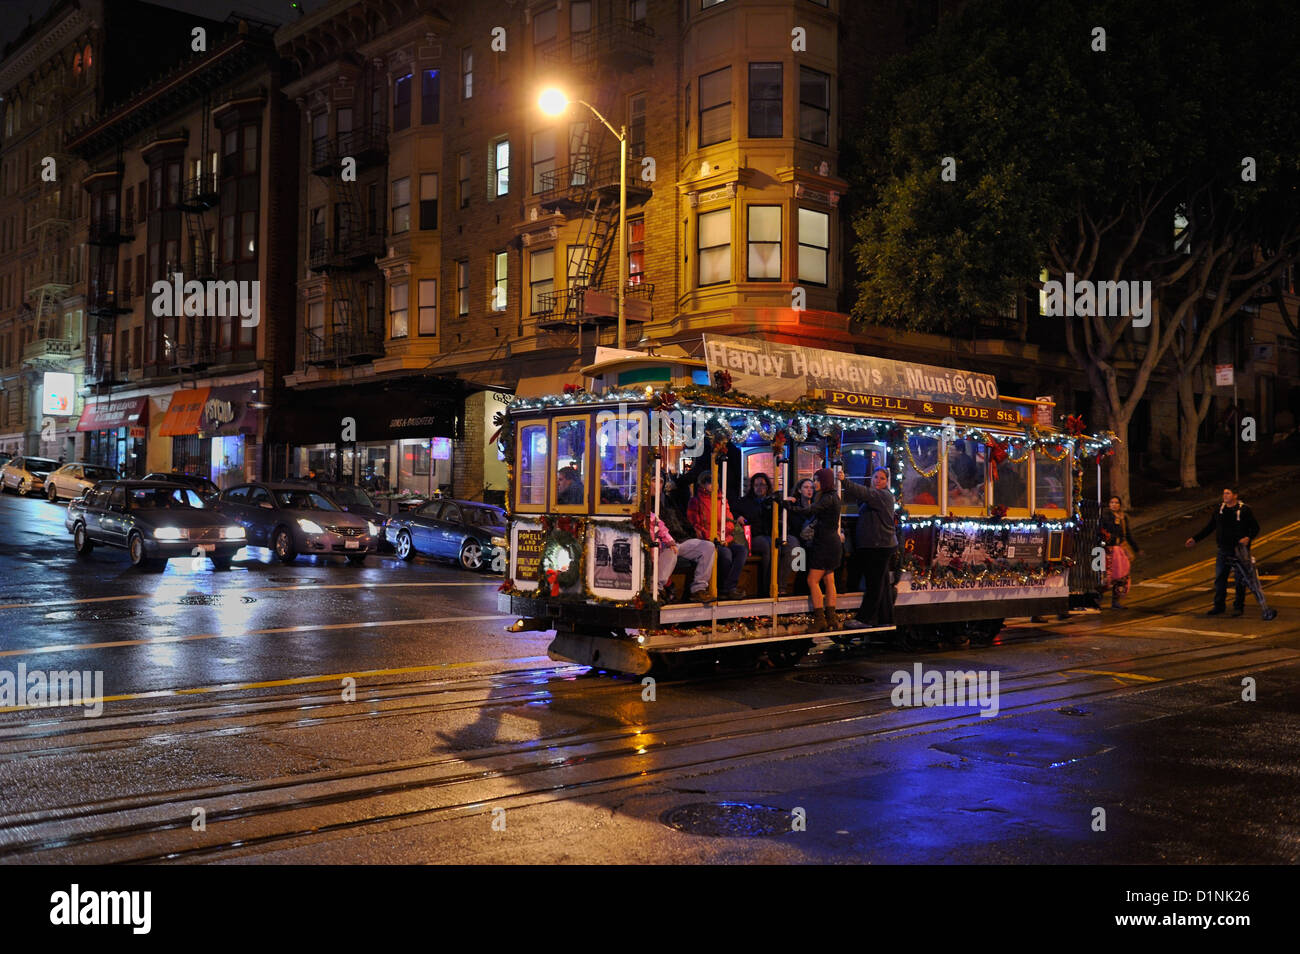 A decorated cable car during the festive season, San Francisco CA Stock Photo